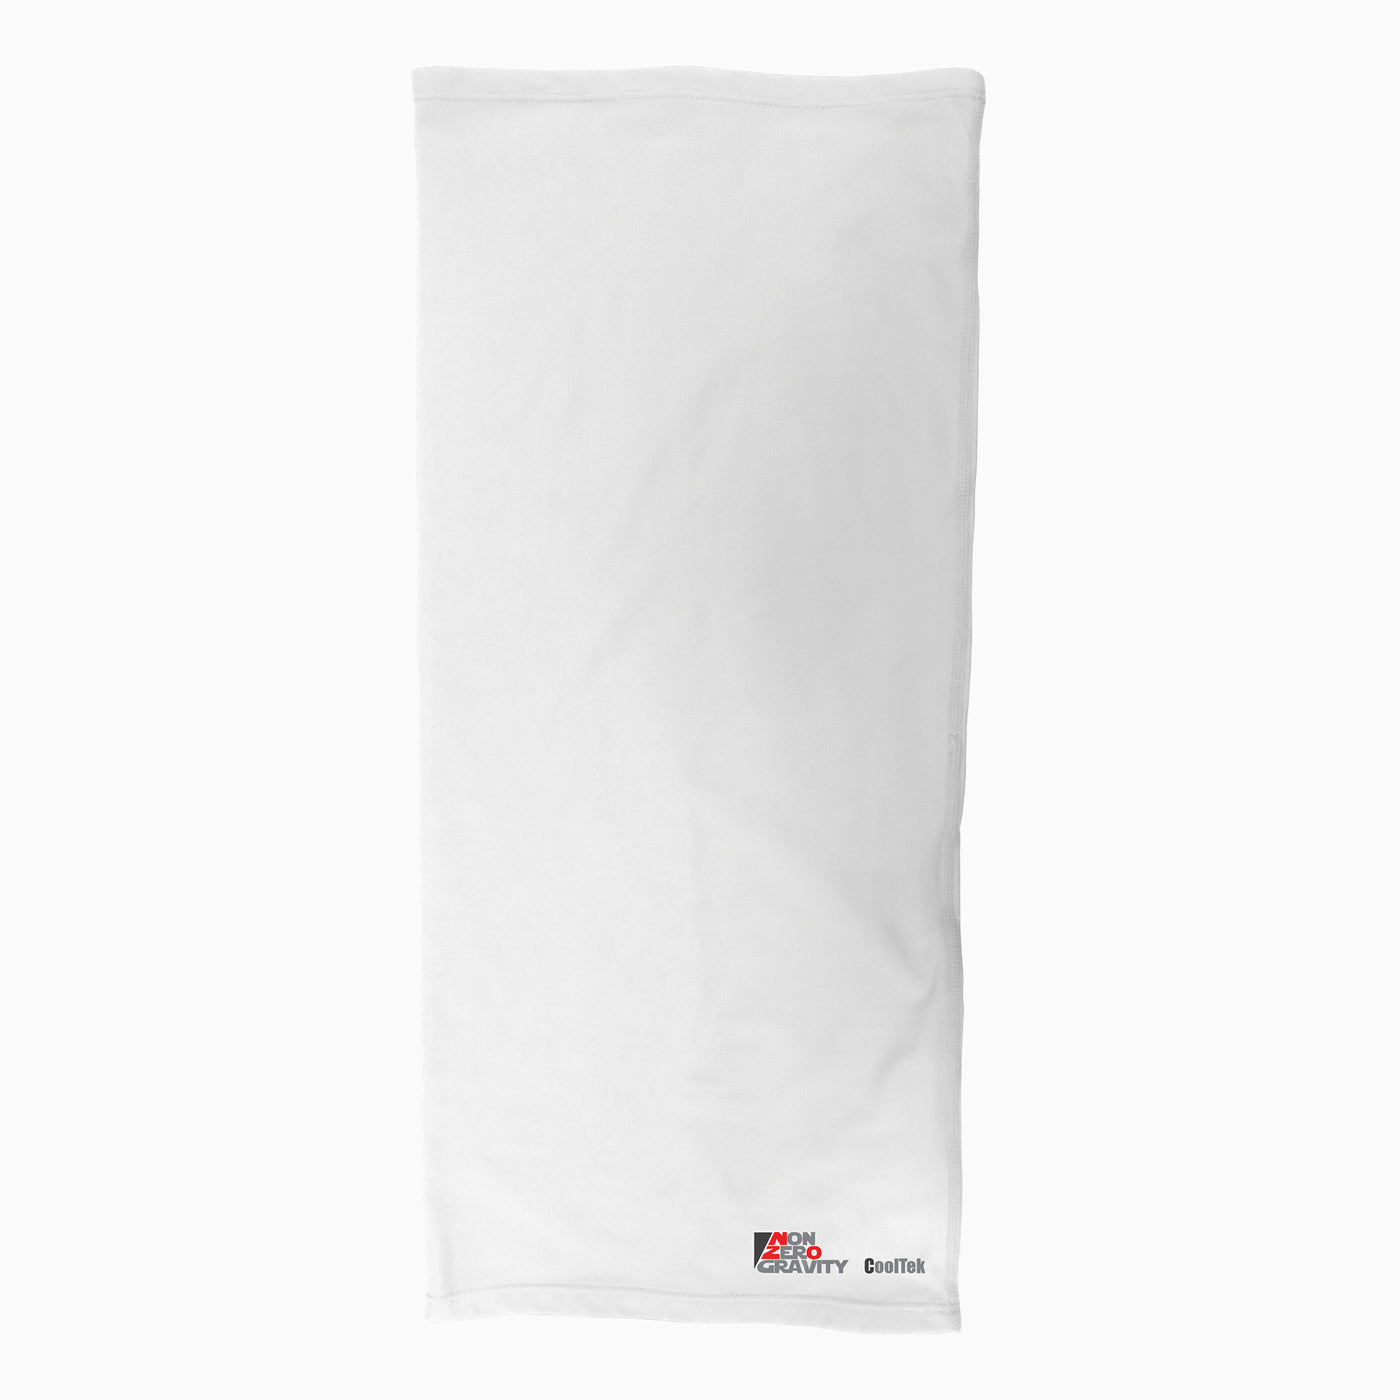 a white spandex athletic neck gaiter to mask and protect your face